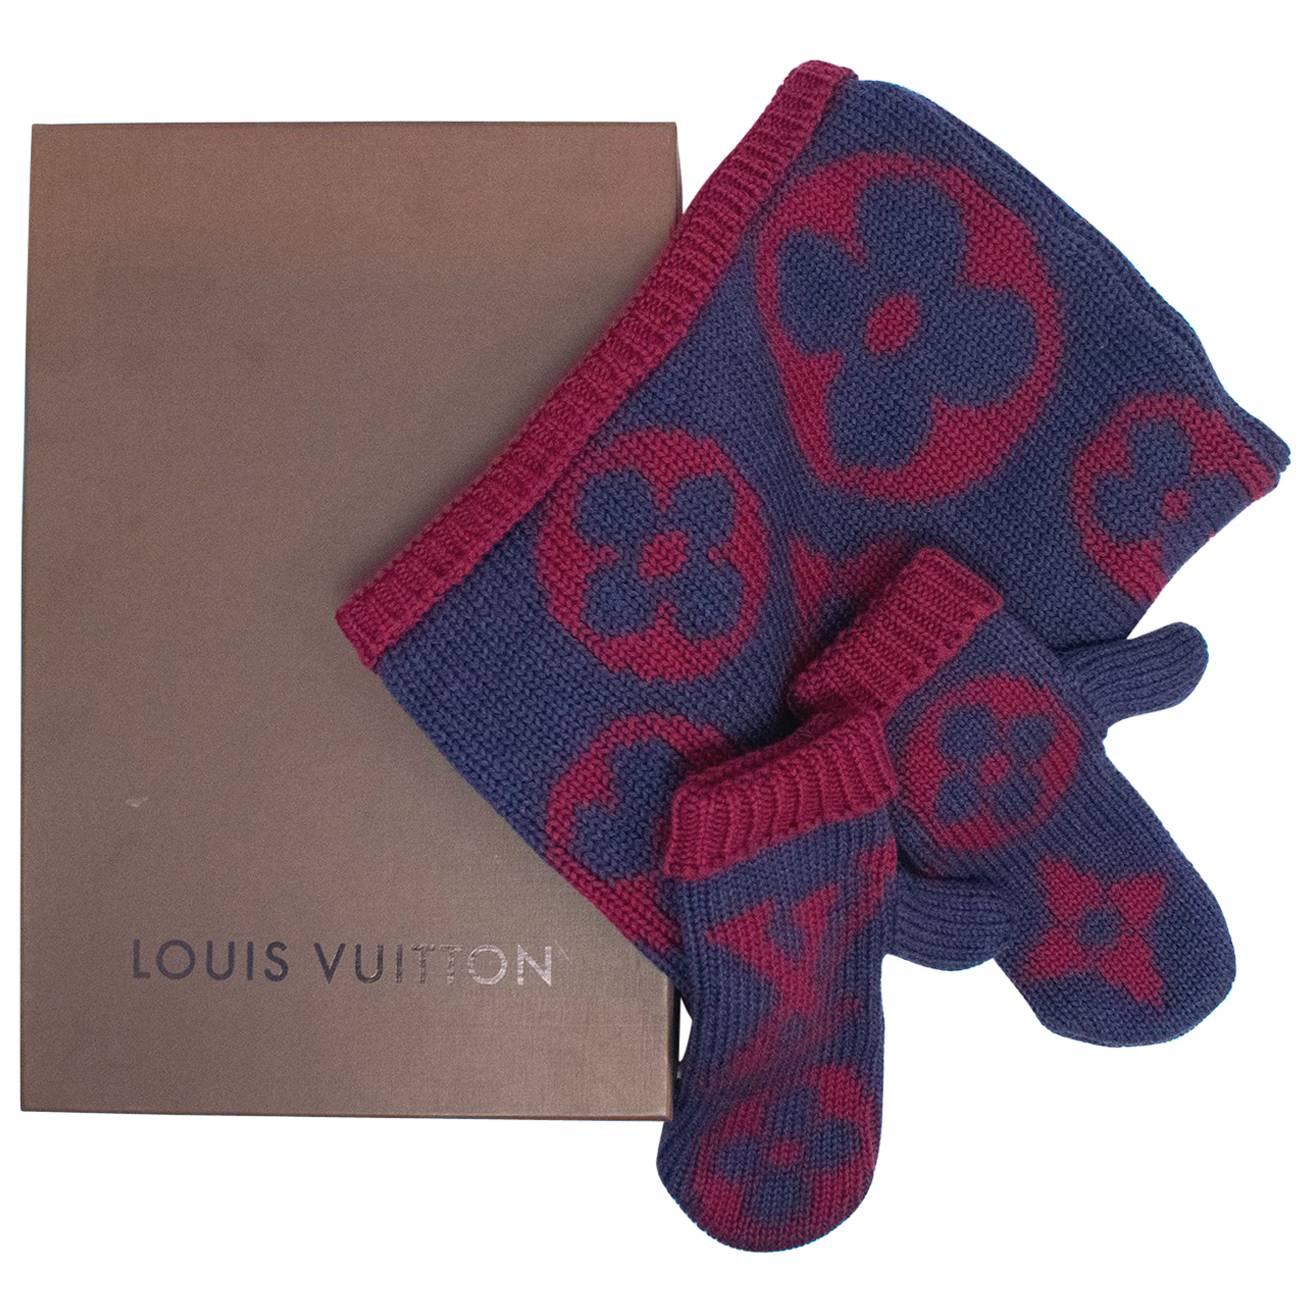 Louis Vuitton Purple and Magenta Knit Snood and Mittens For Sale